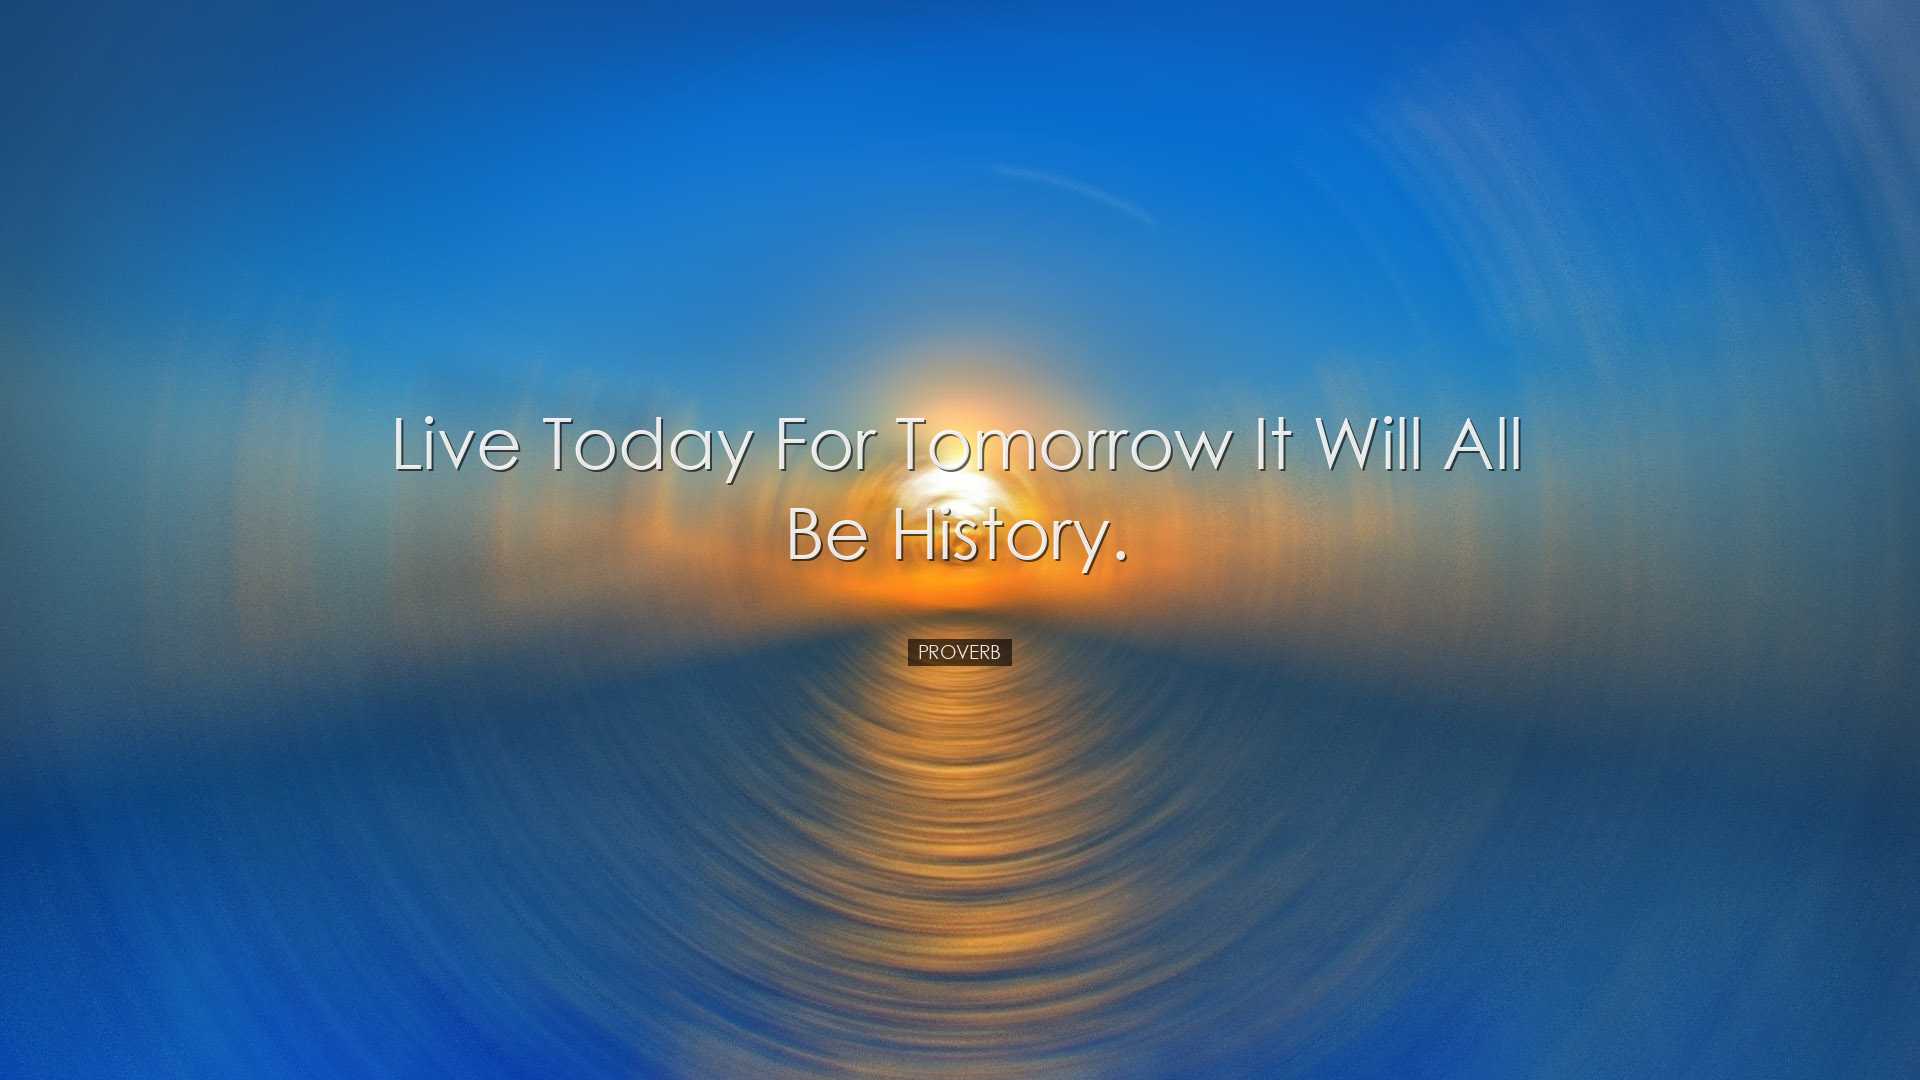 Live today for tomorrow it will all be history. - Proverb